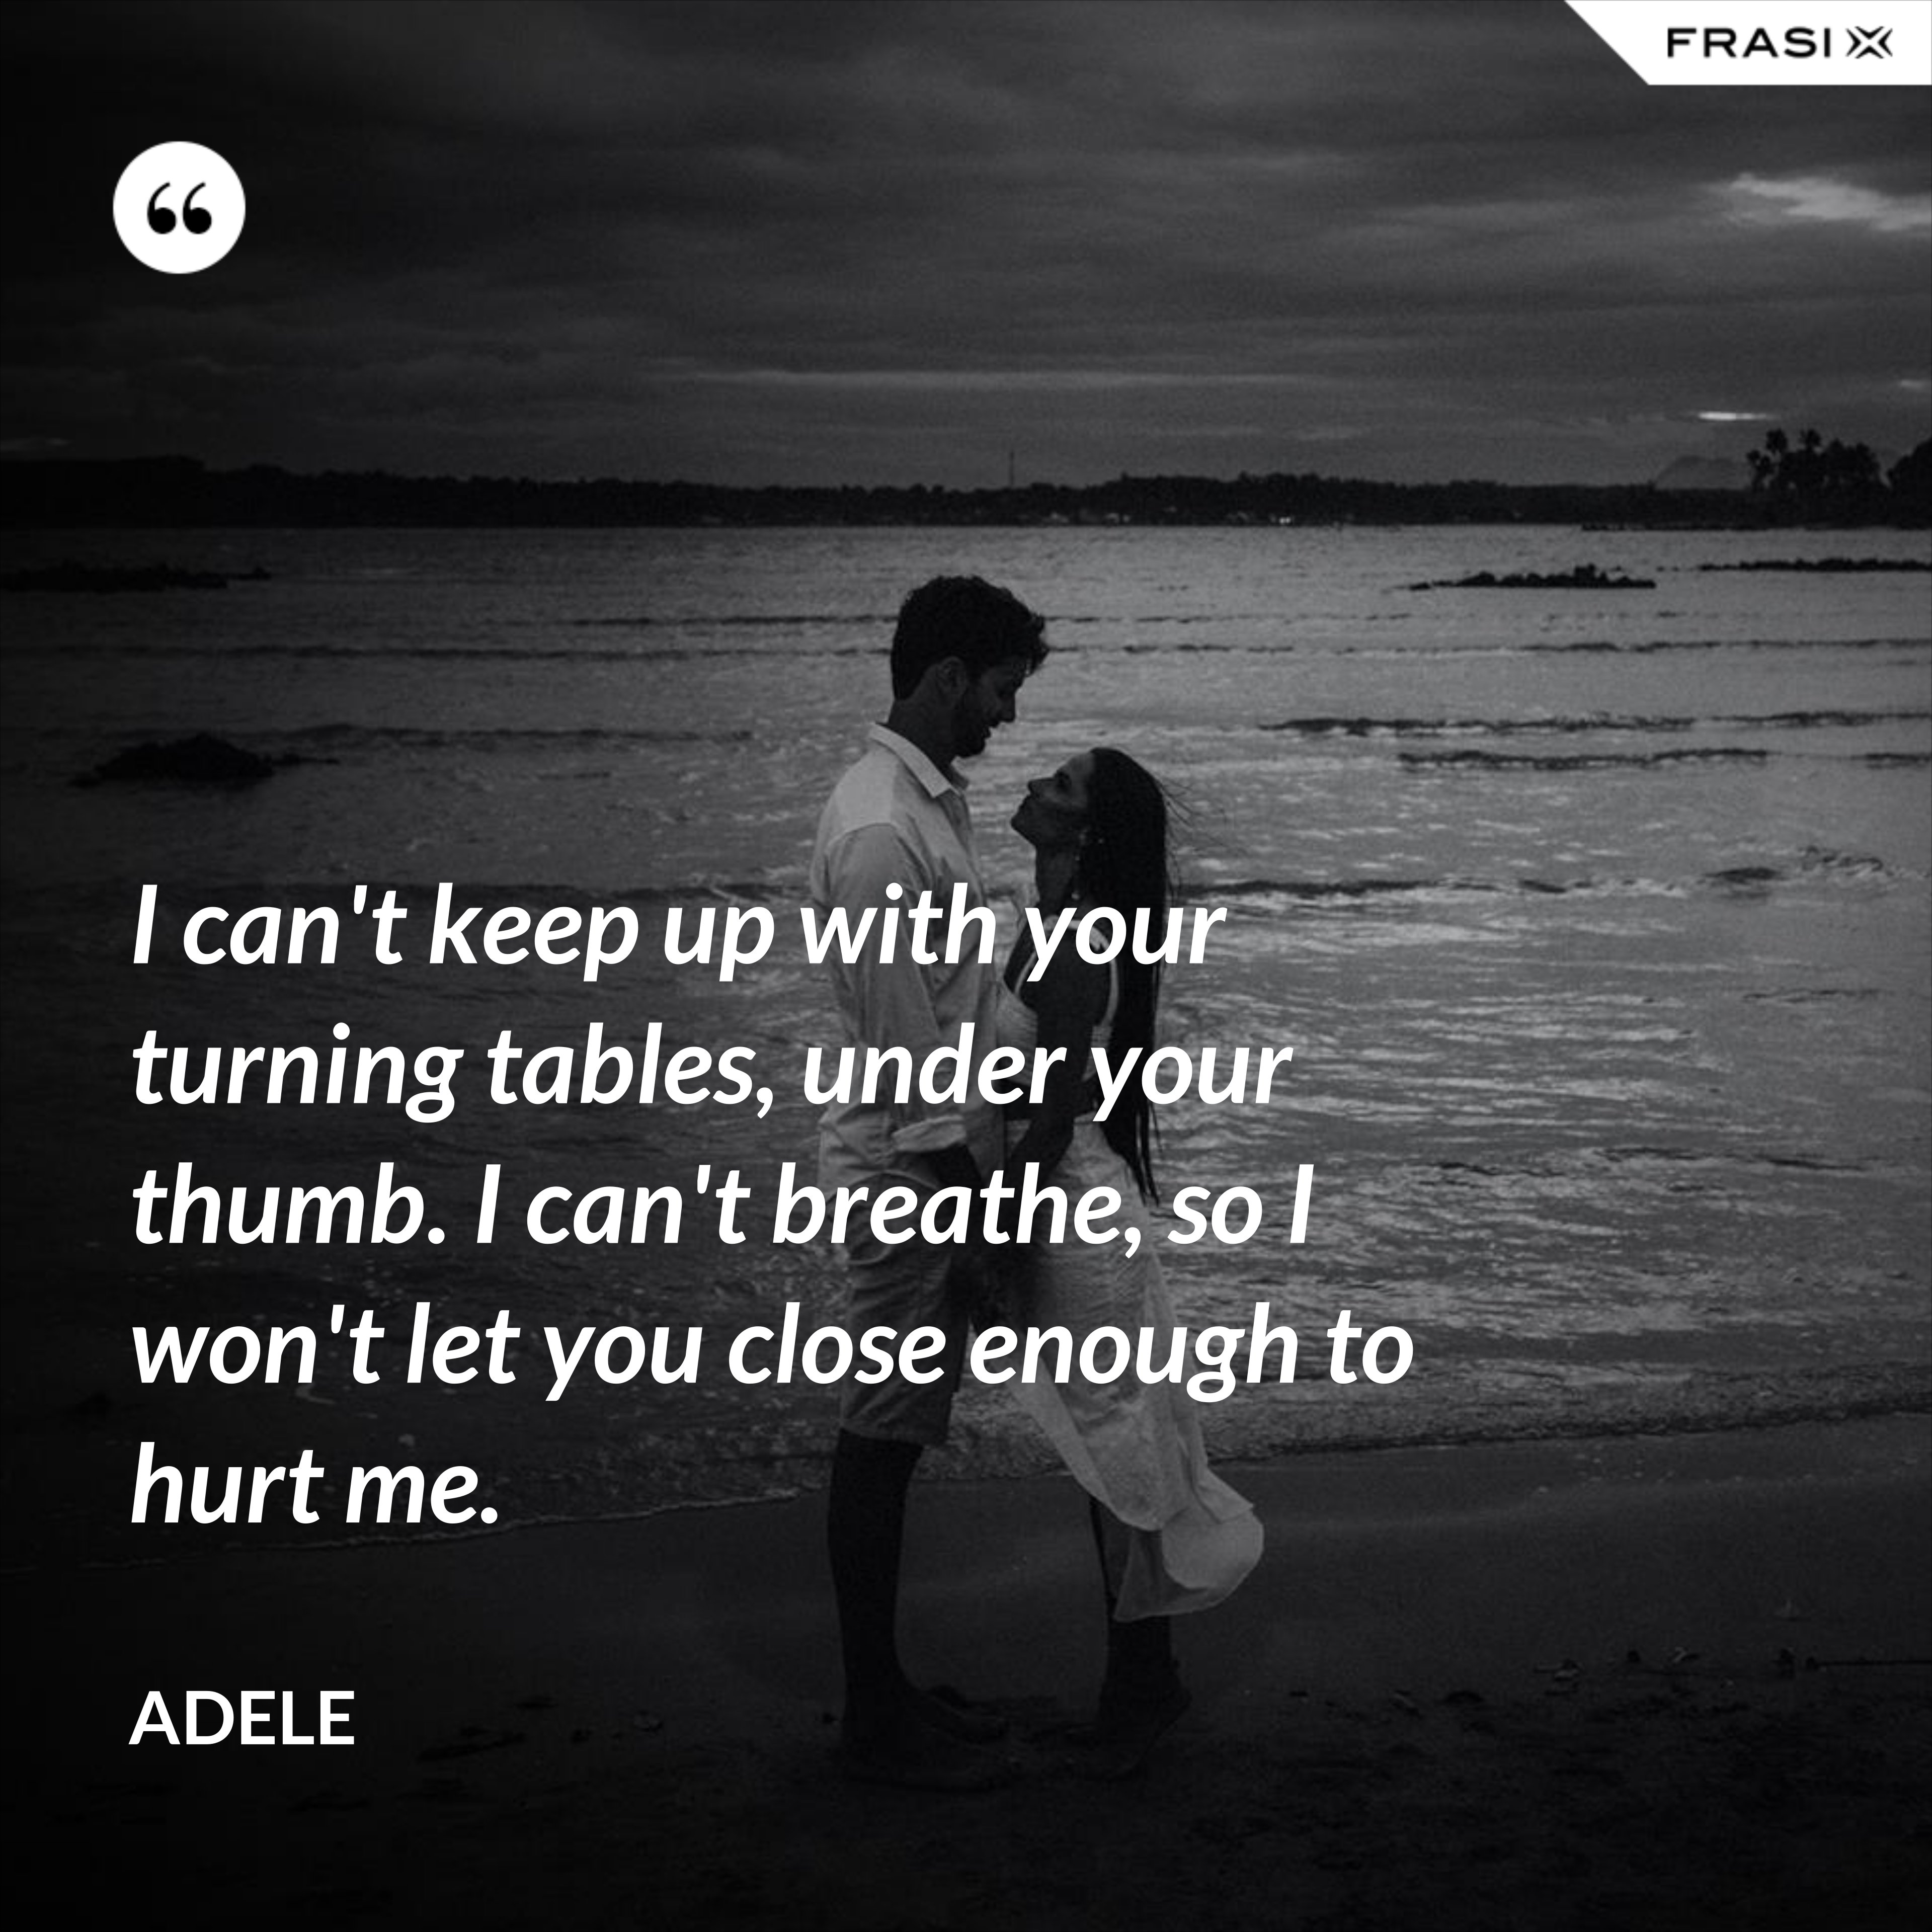 I can't keep up with your turning tables, under your thumb. I can't breathe, so I won't let you close enough to hurt me. - Adele